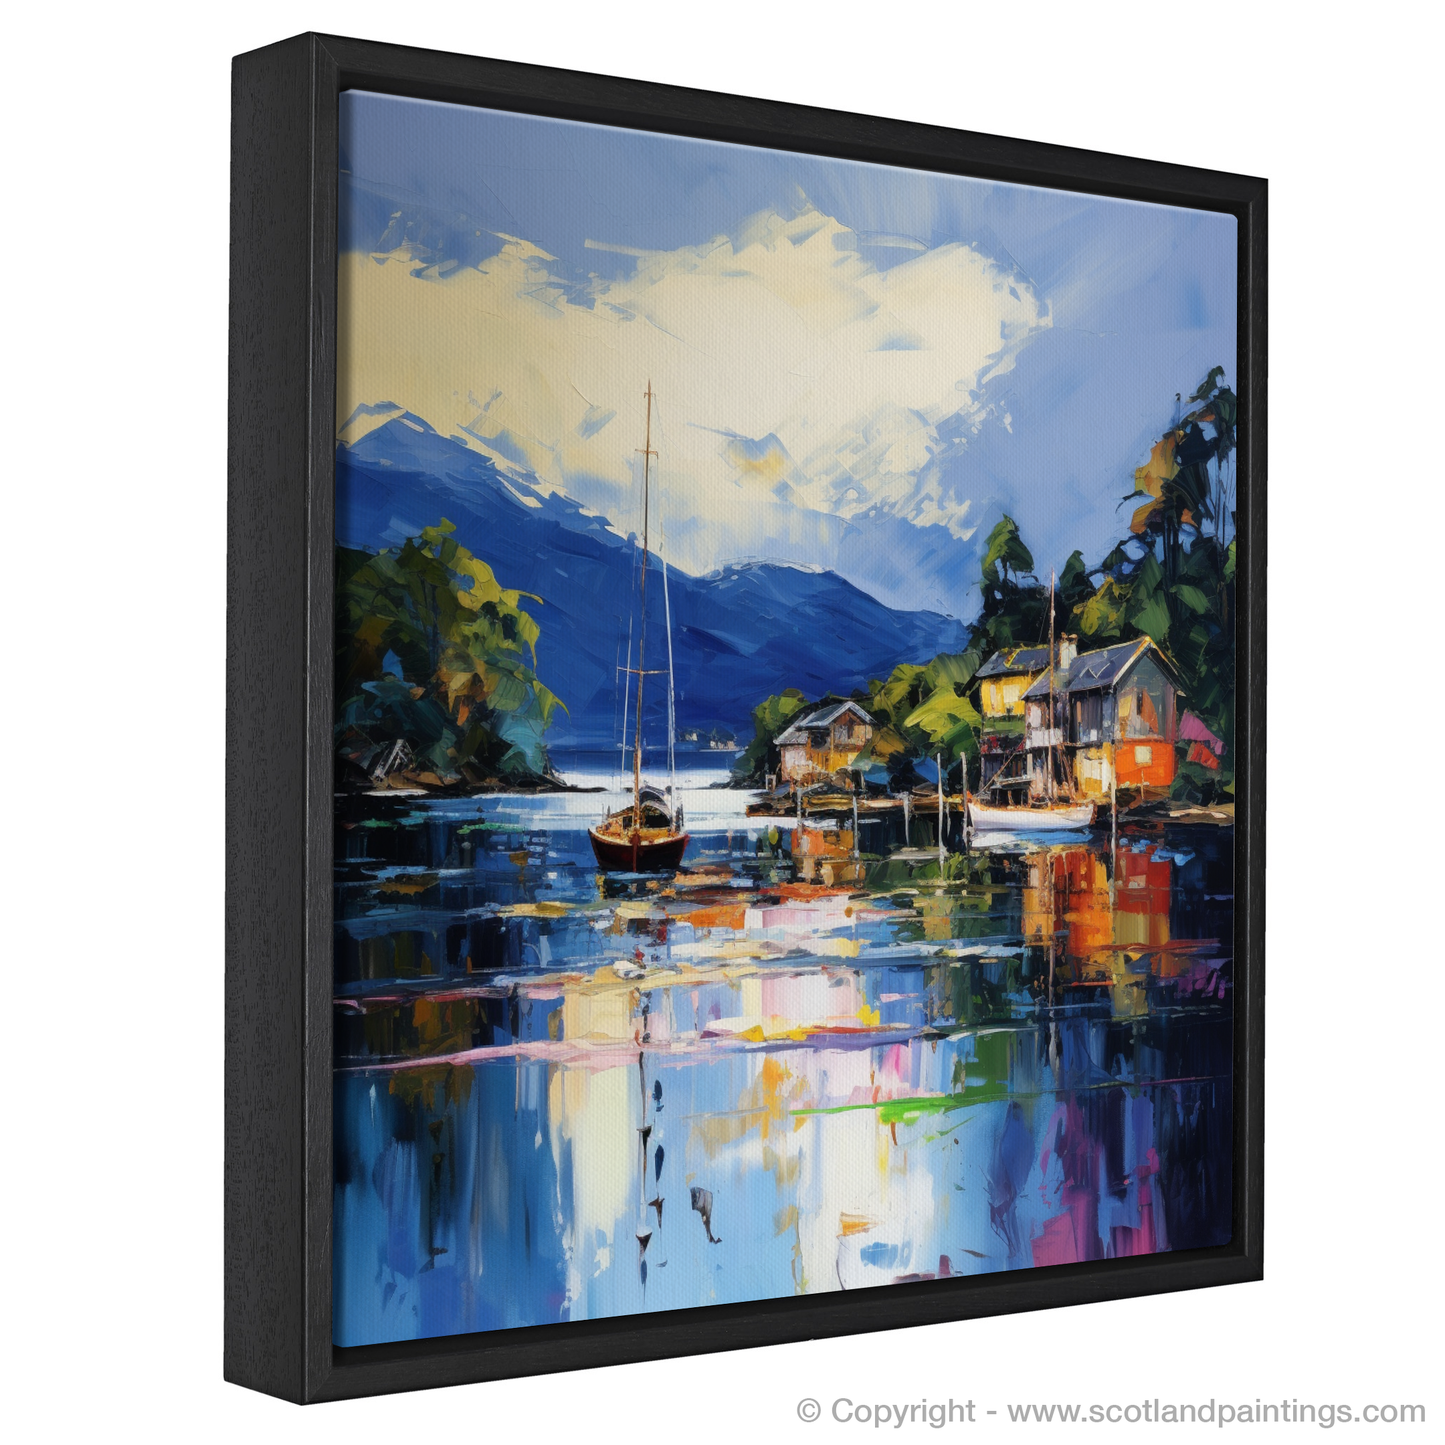 Painting and Art Print of Balmaha Harbour, Loch Lomond entitled "Vibrant Balmaha: An Expressionist Ode to Loch Lomond".